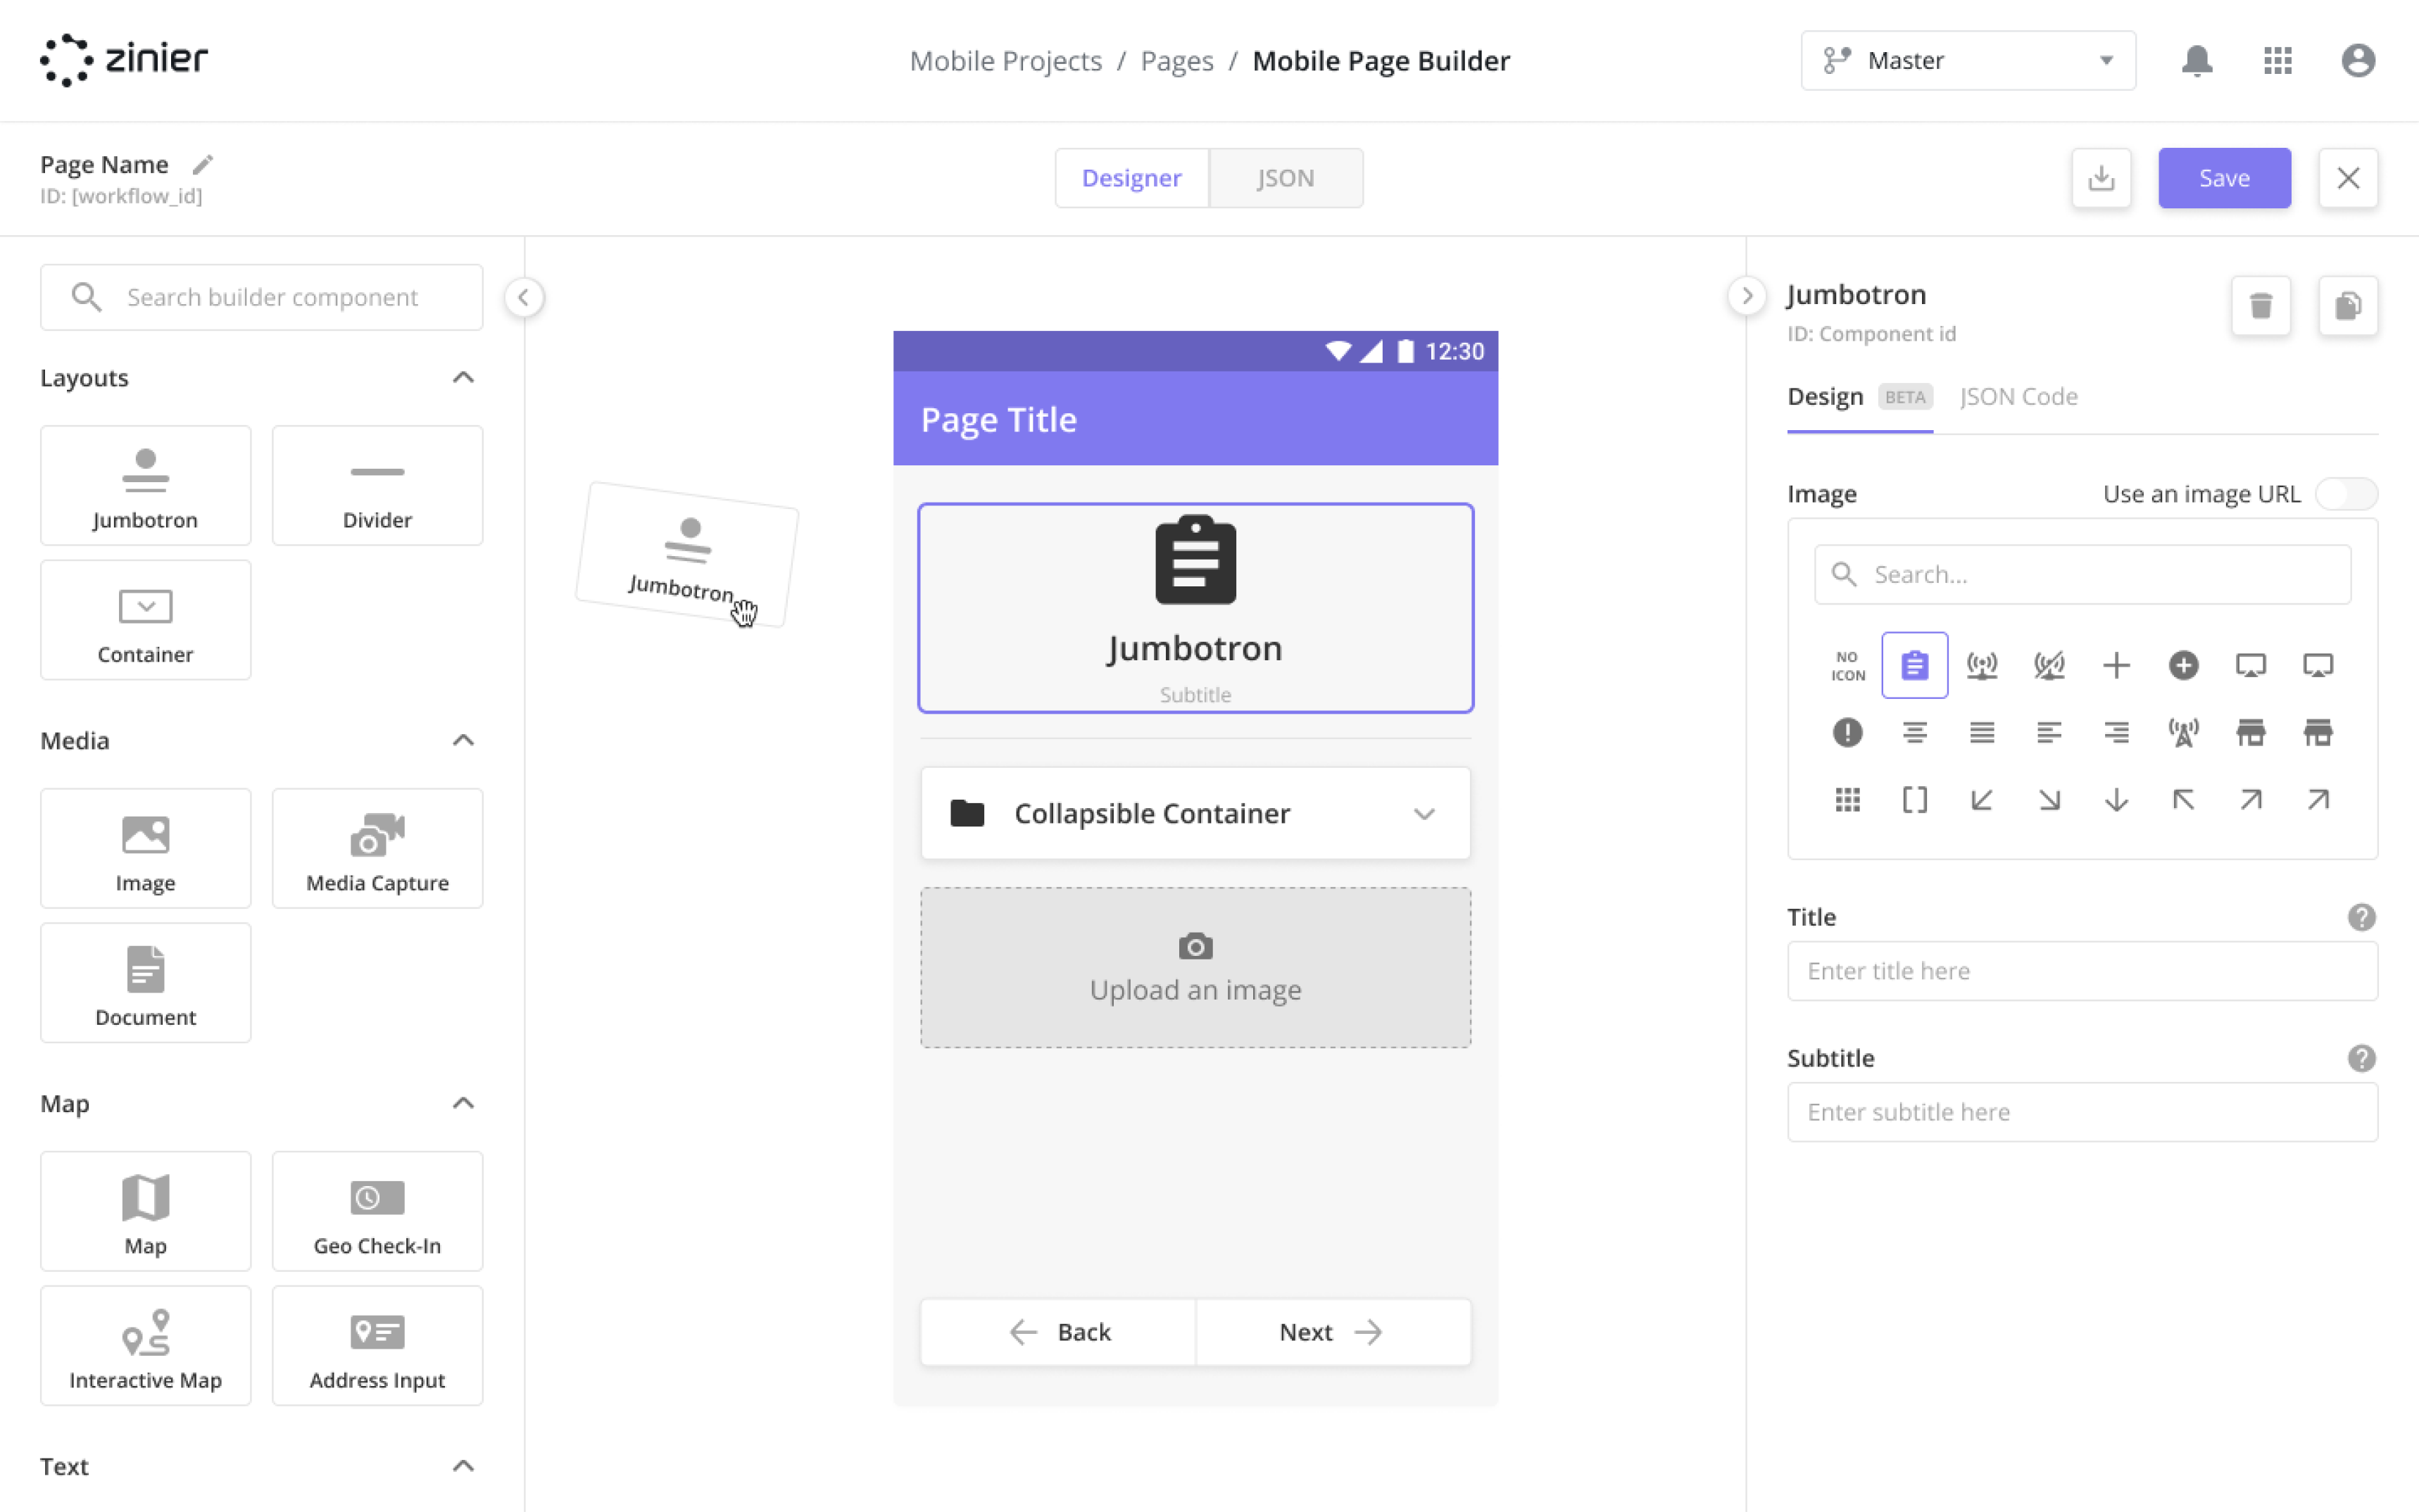 Mobile Page Builder. Create no-code mobile field experiences for techs in minutes